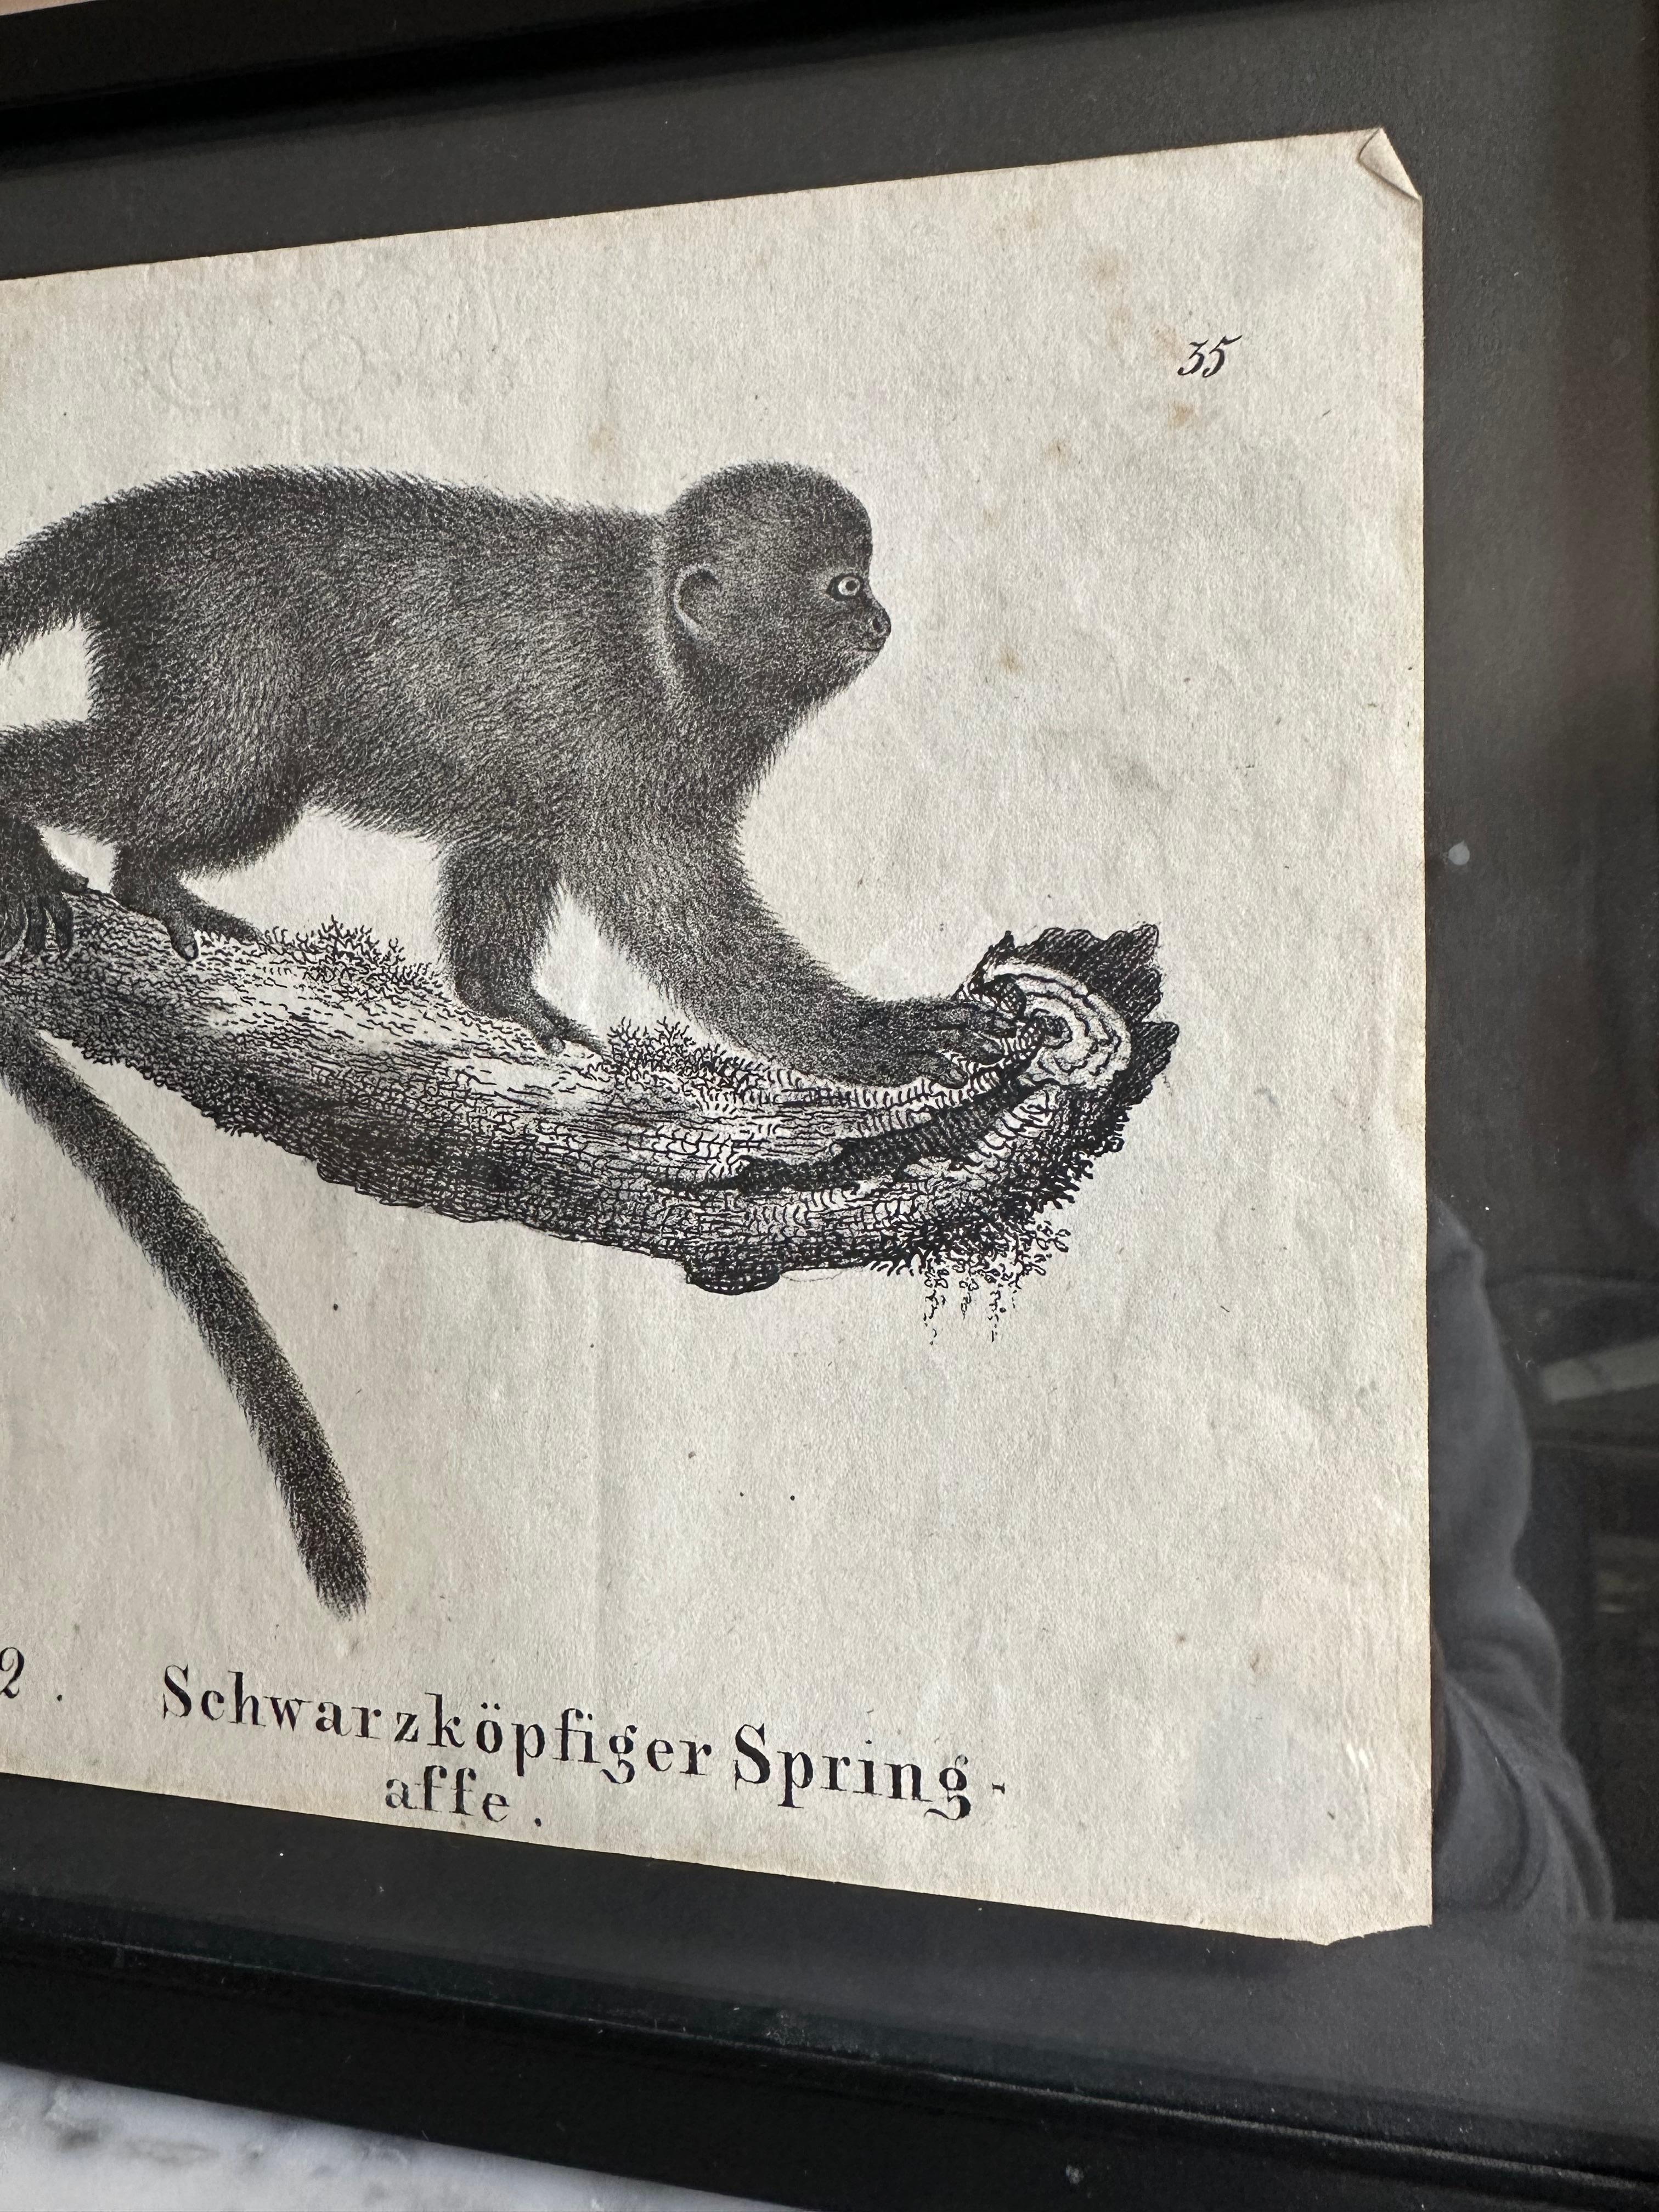 Paper Zoological Original Lithograph Featuring a Monkey from 1831-35 For Sale